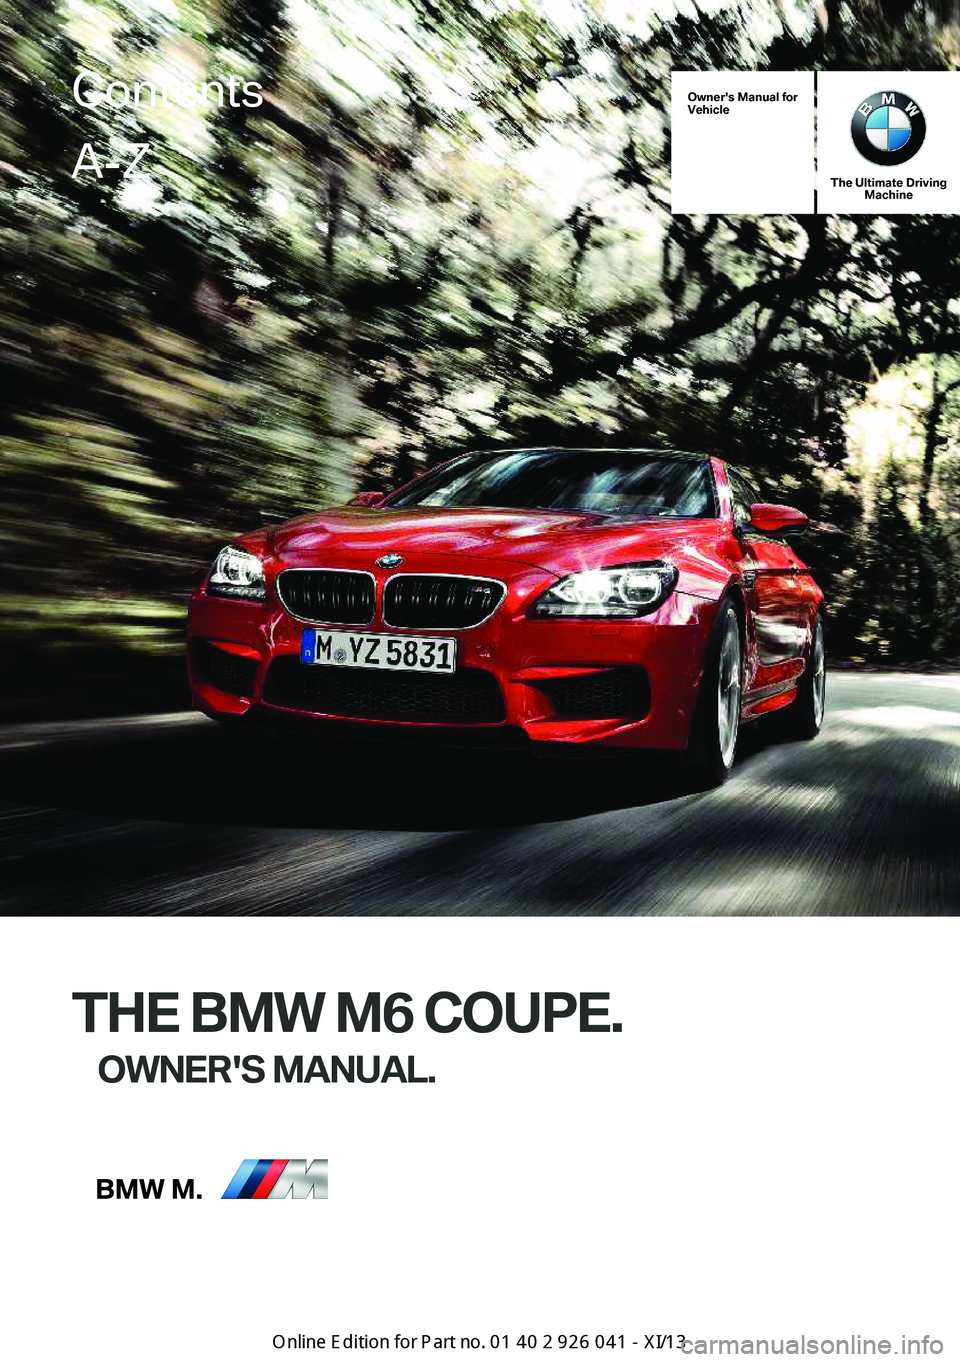 BMW M6 COUPE 2013 F13 Owners Manual Owner's Manual for
Vehicle
The Ultimate Driving Machine
THE BMW M6 COUPE.
OWNER'S MANUAL.
ContentsA-Z
Online Edition for Part no. 01 40 2 910 796 - VI/13   